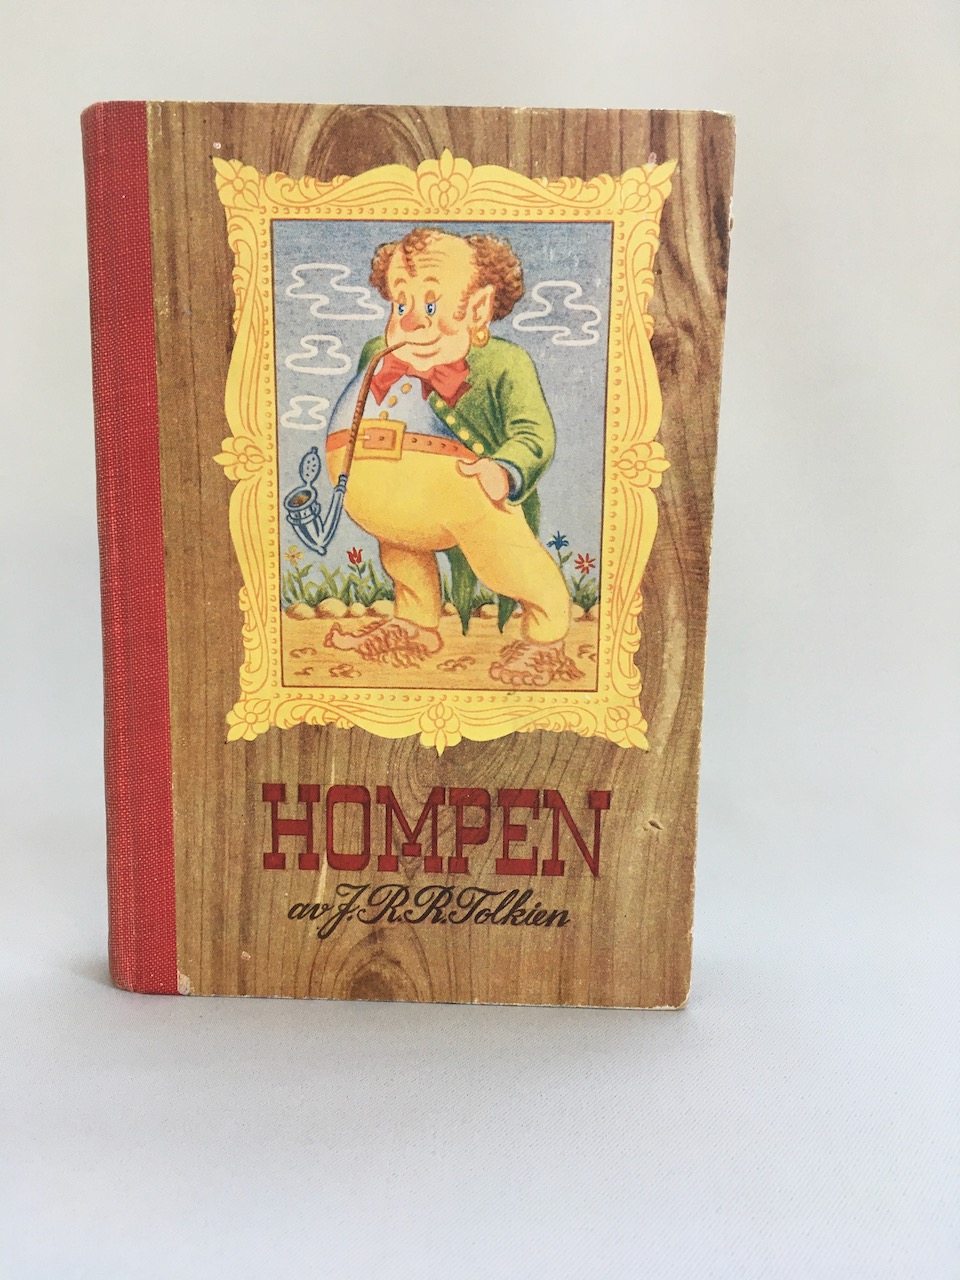 Hompen [The Hobbit, or There and Back Again] published by Stockholm: Kooperativa Förbundets in 1947